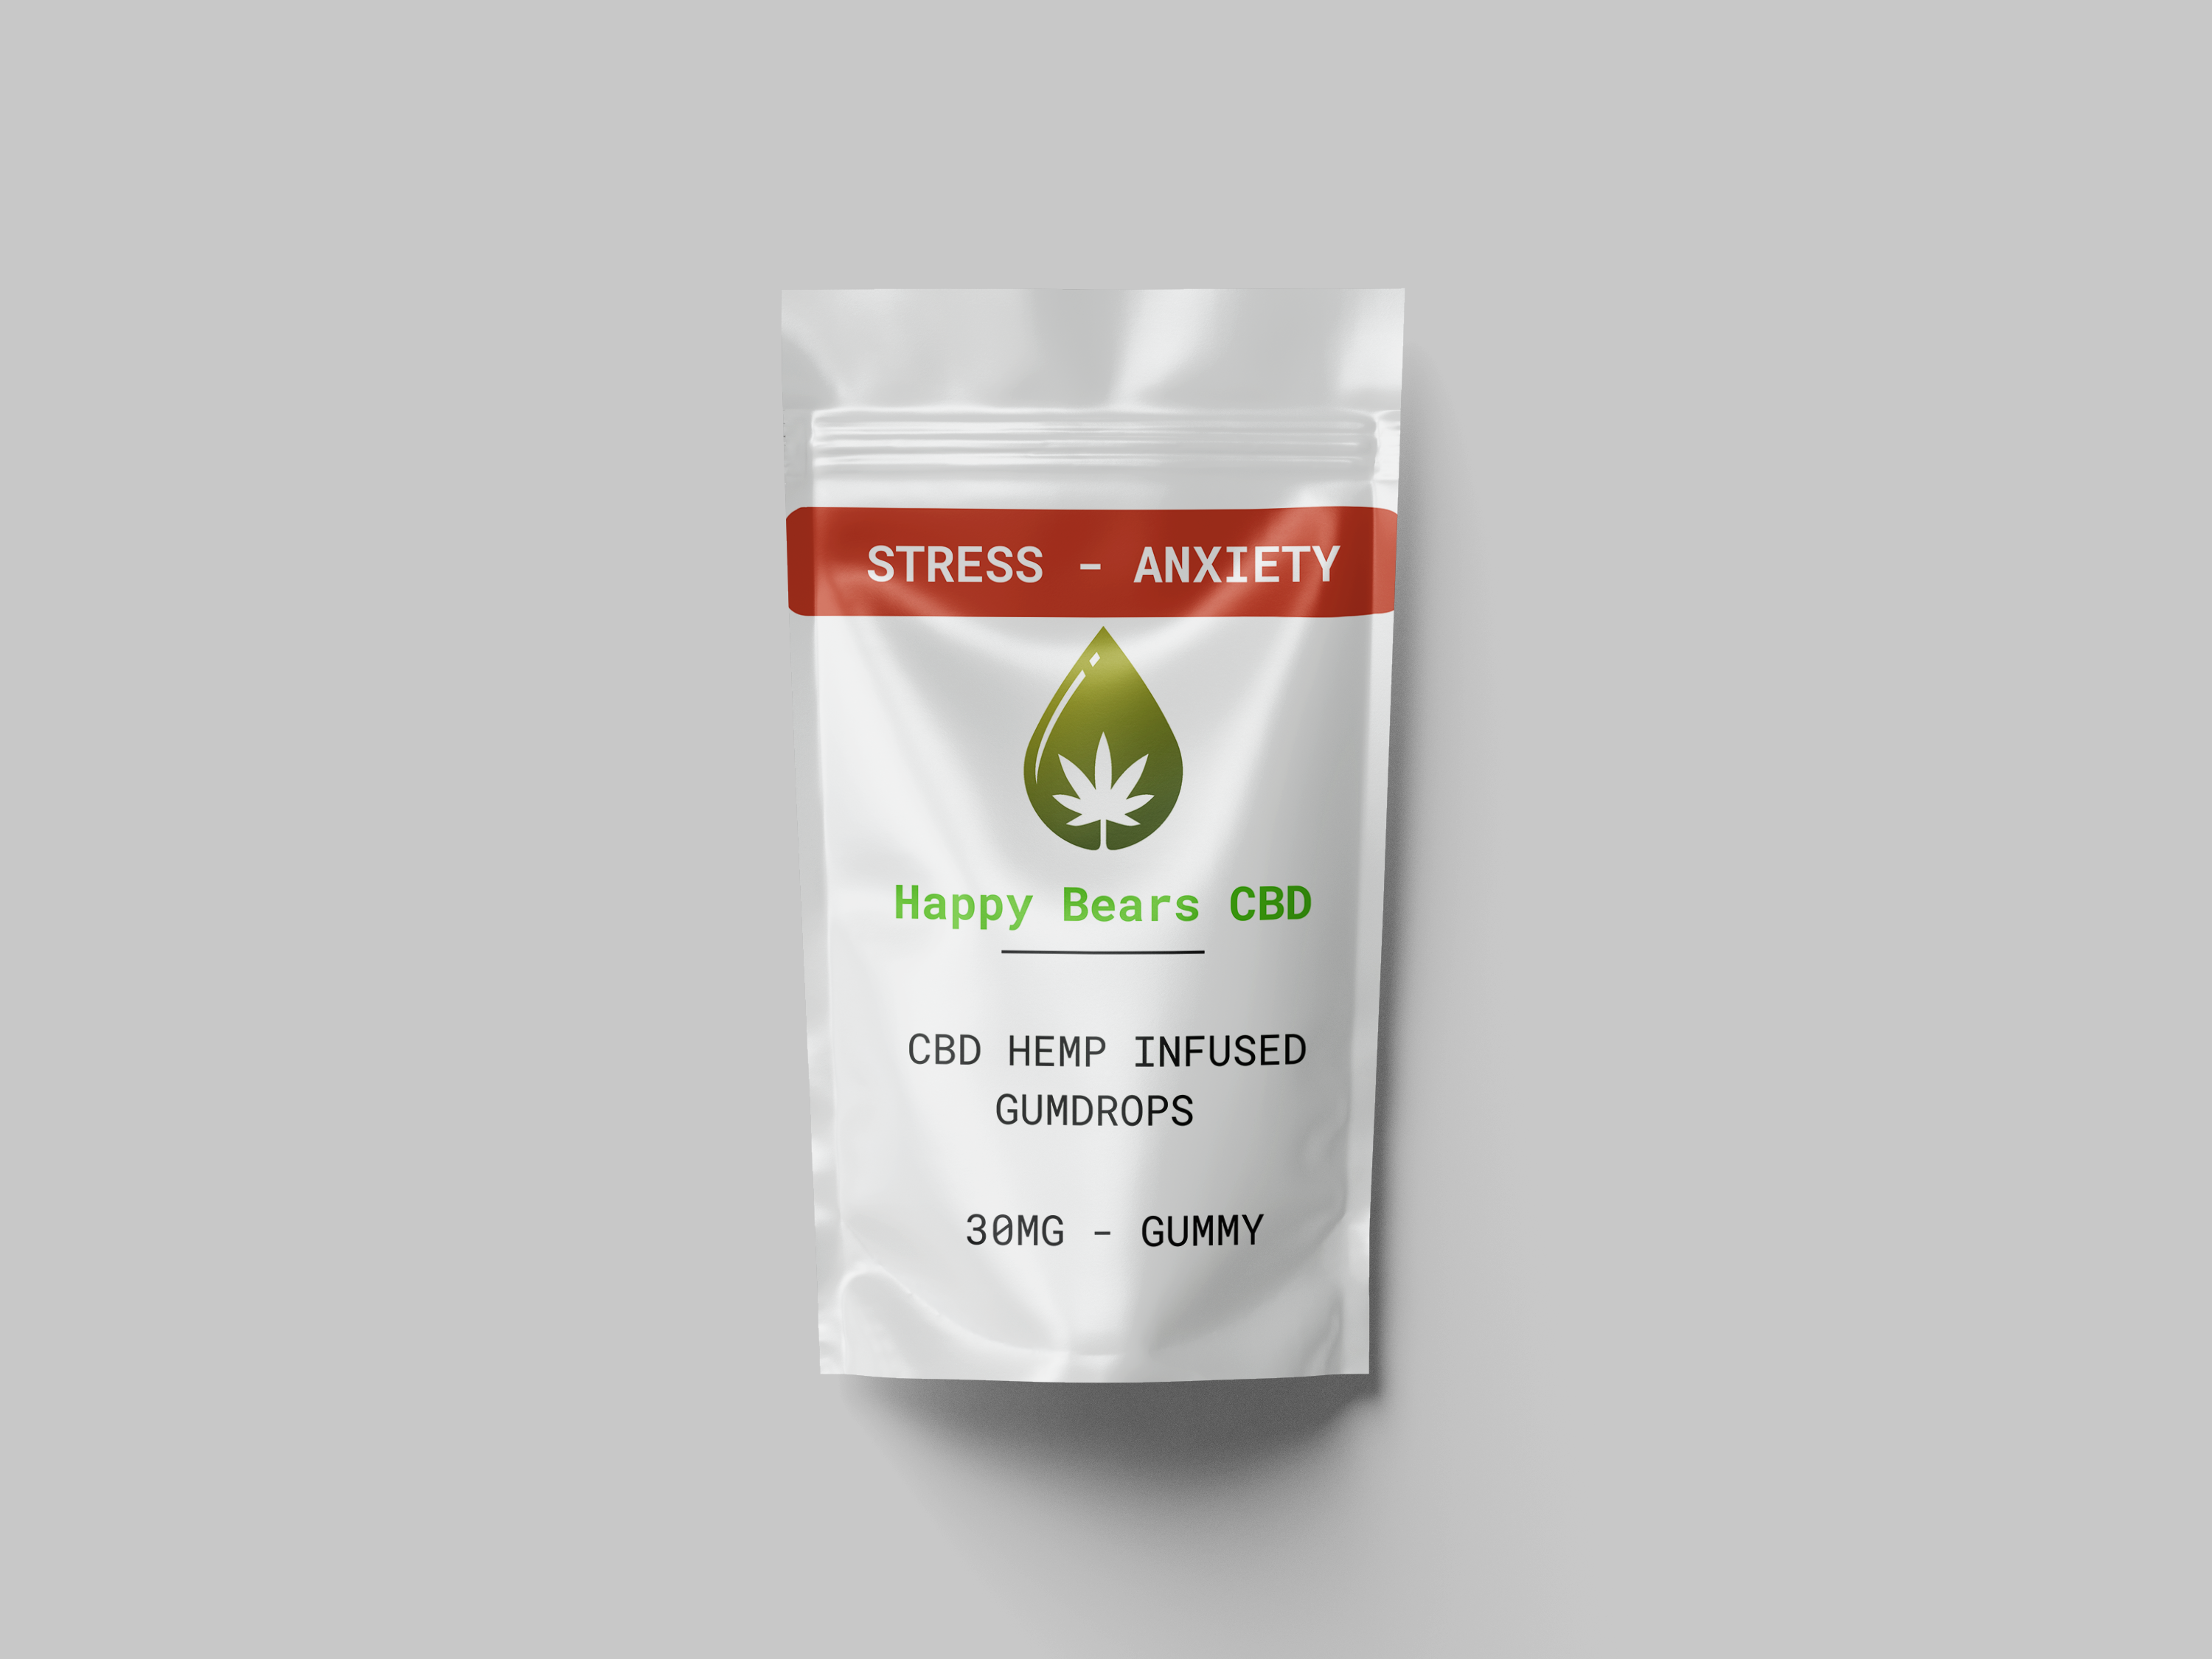 CBD Hemp Infused Gumdrops for Stress and Anxiety (30pcs)